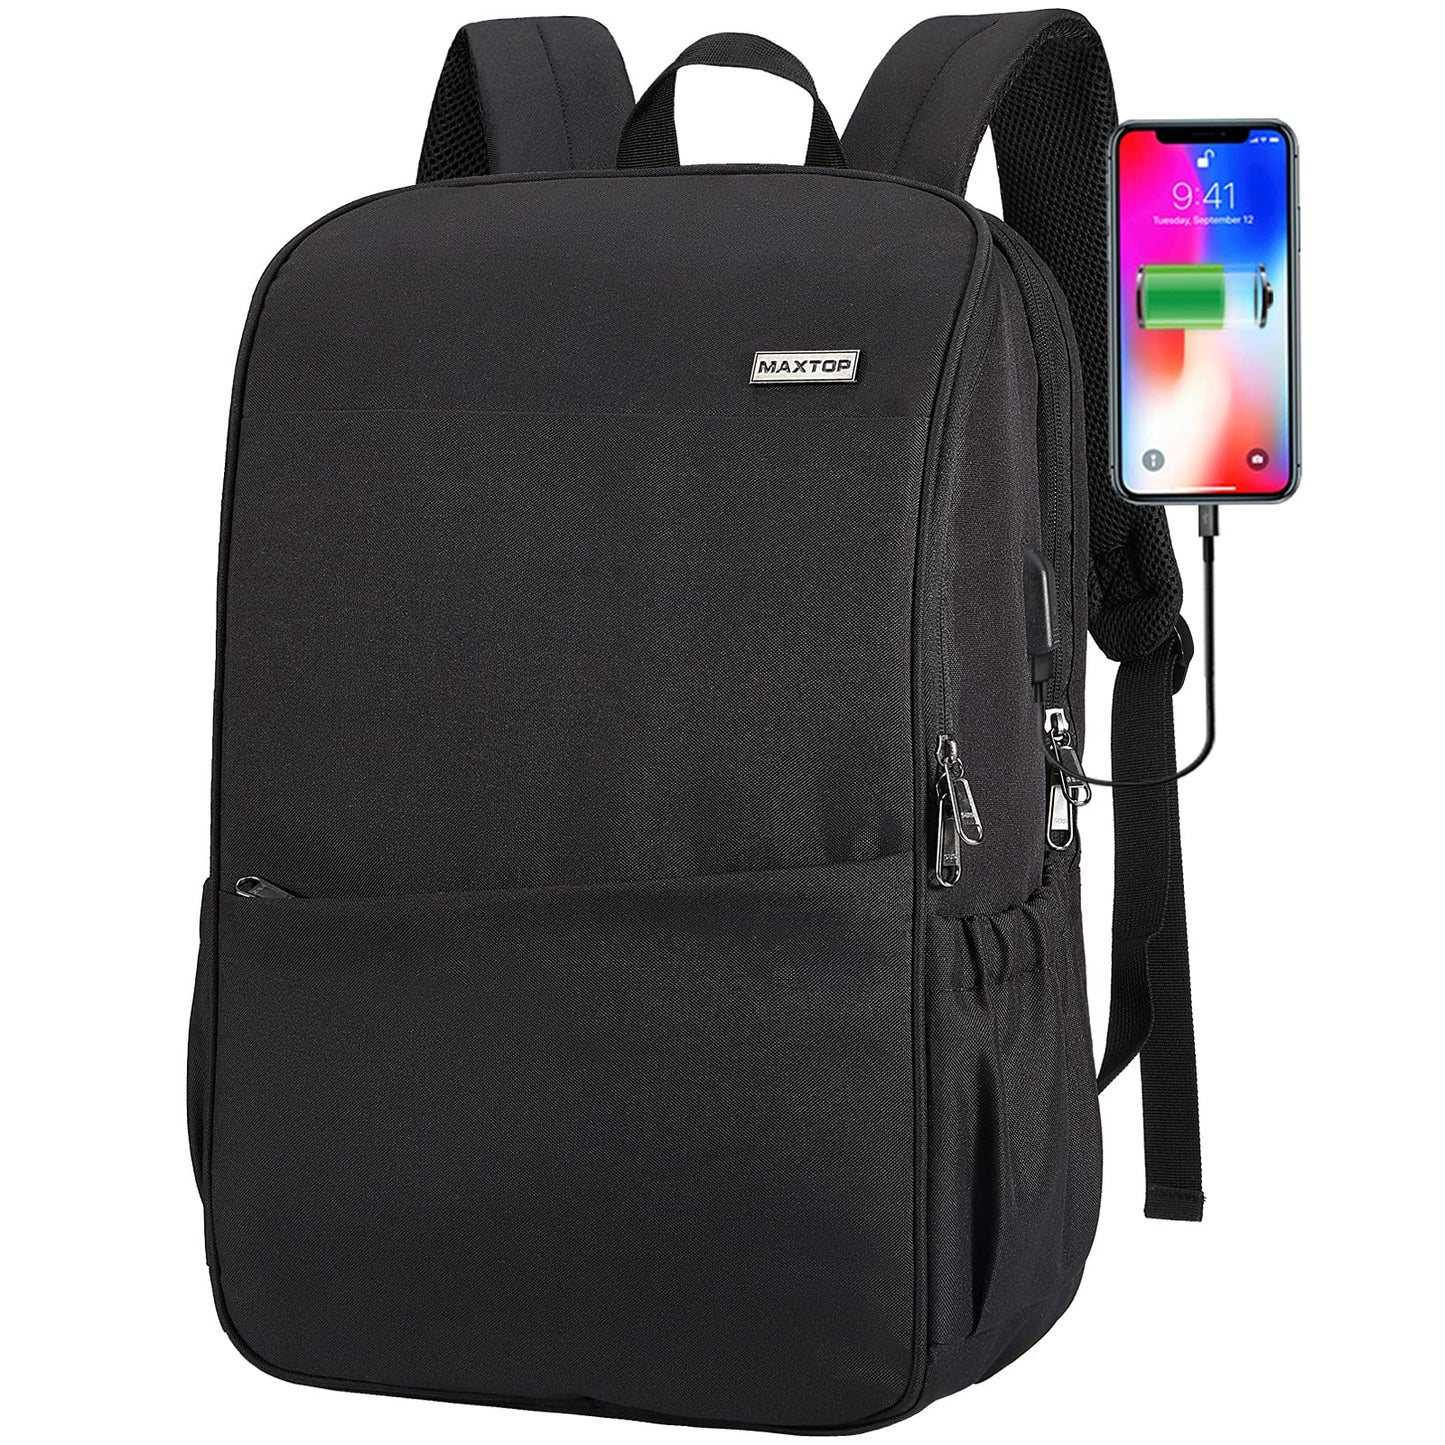 Deep Storage Laptop Backpack with USB Charging Port[Water Resistant] College School Computer Bookbag Fits 16/17 Inch Laptop